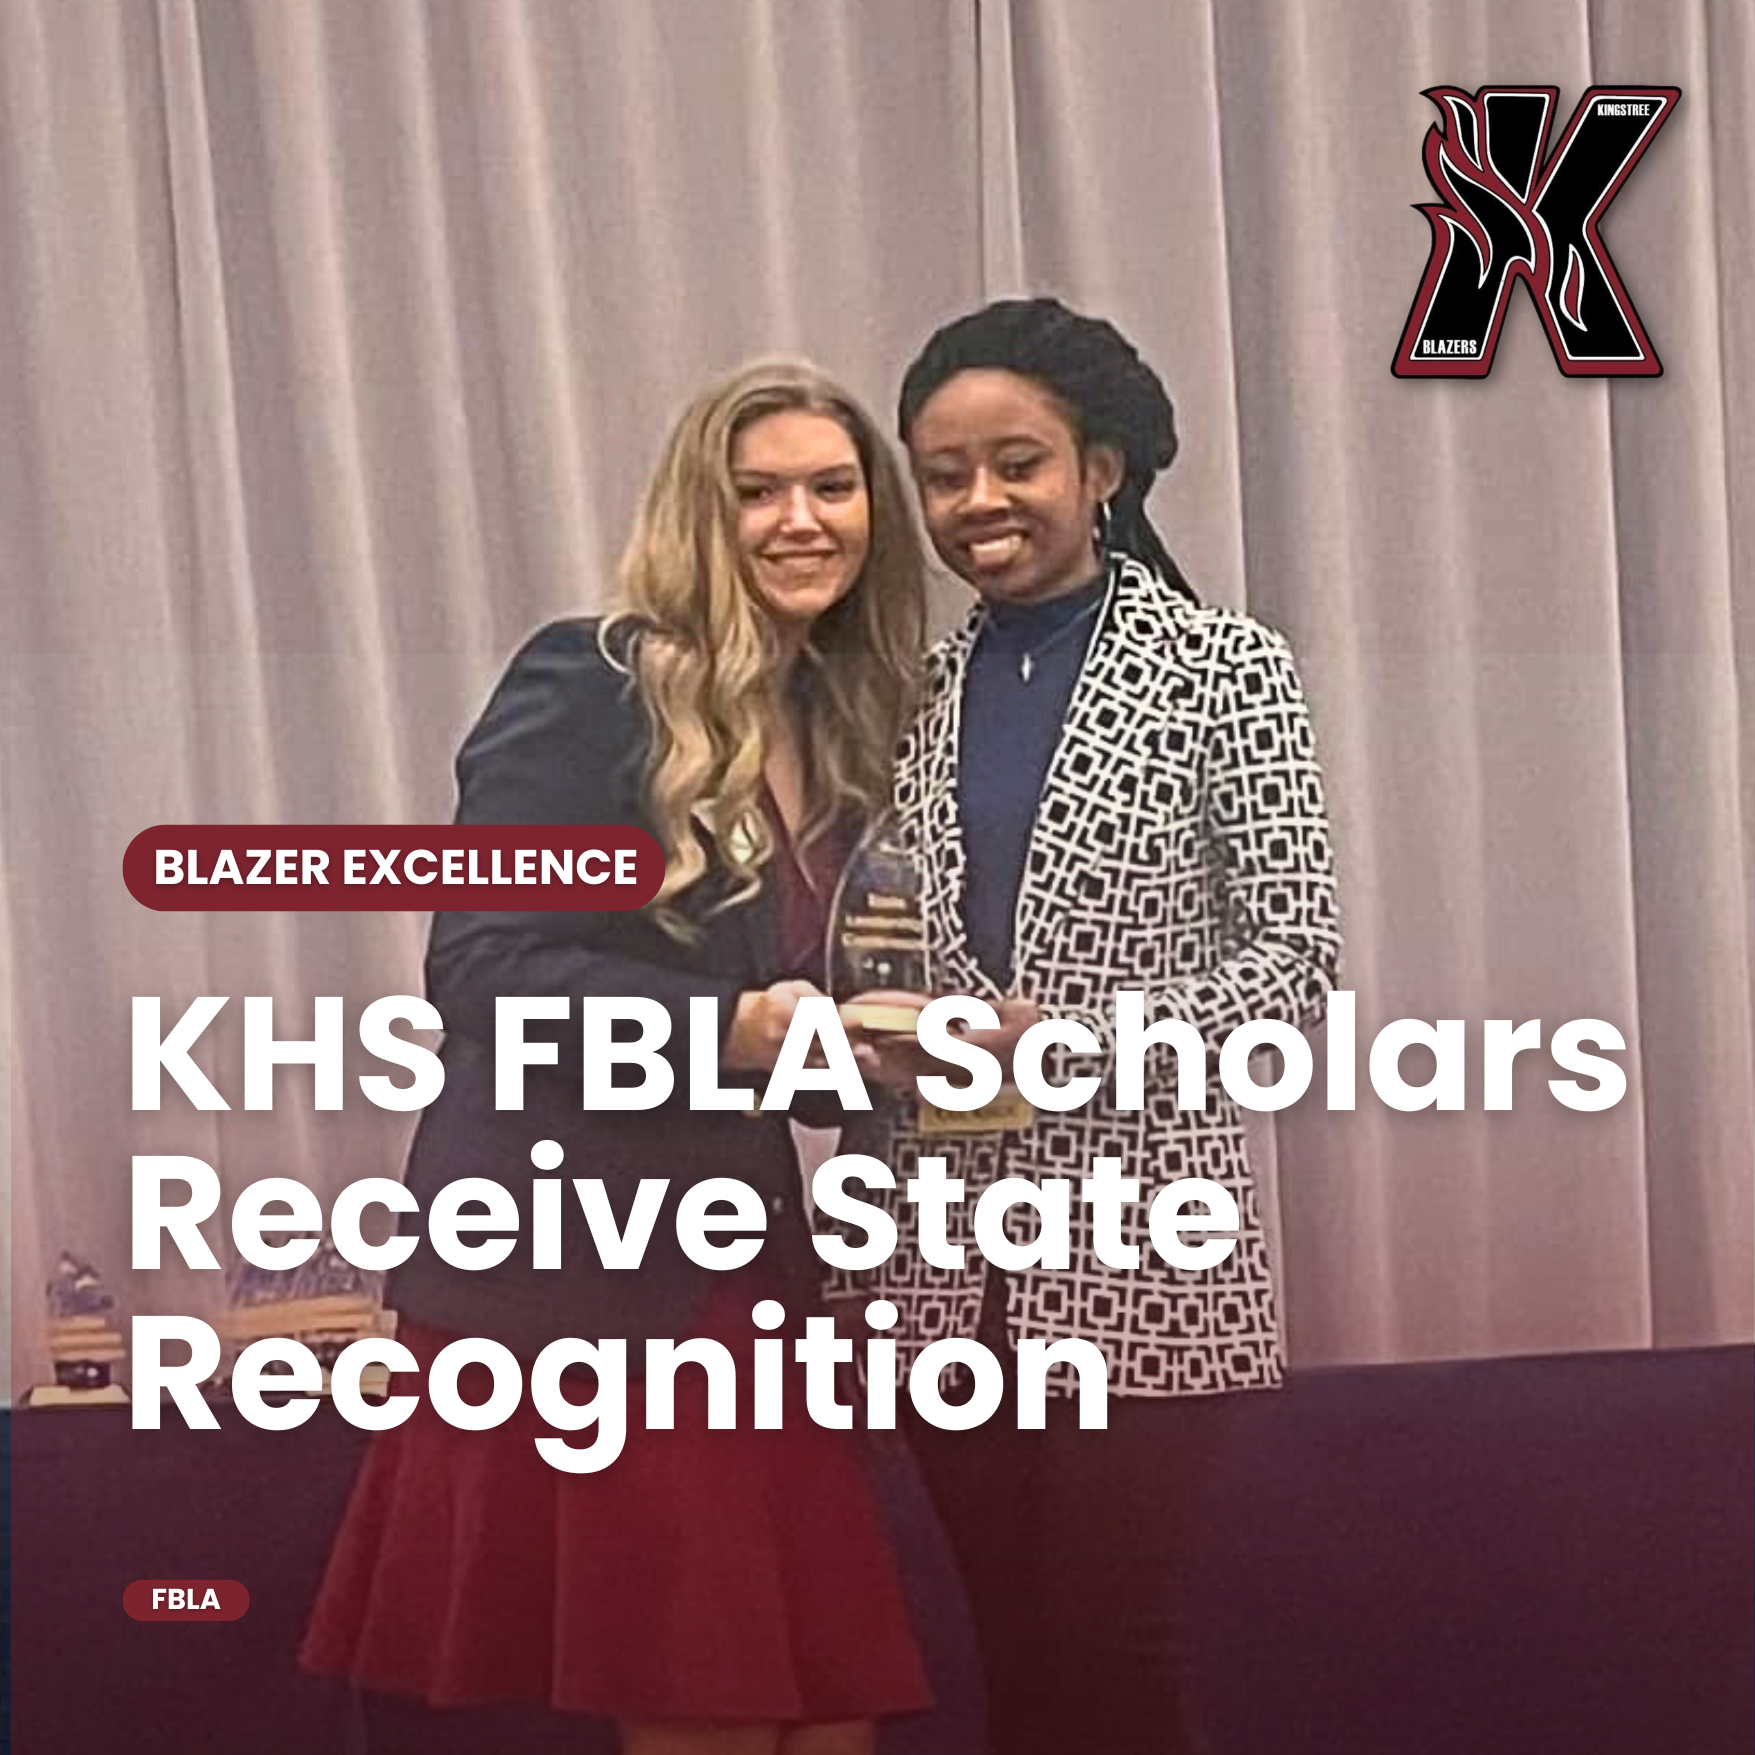 KHS Scholar receiving award during state FBLA Conference.